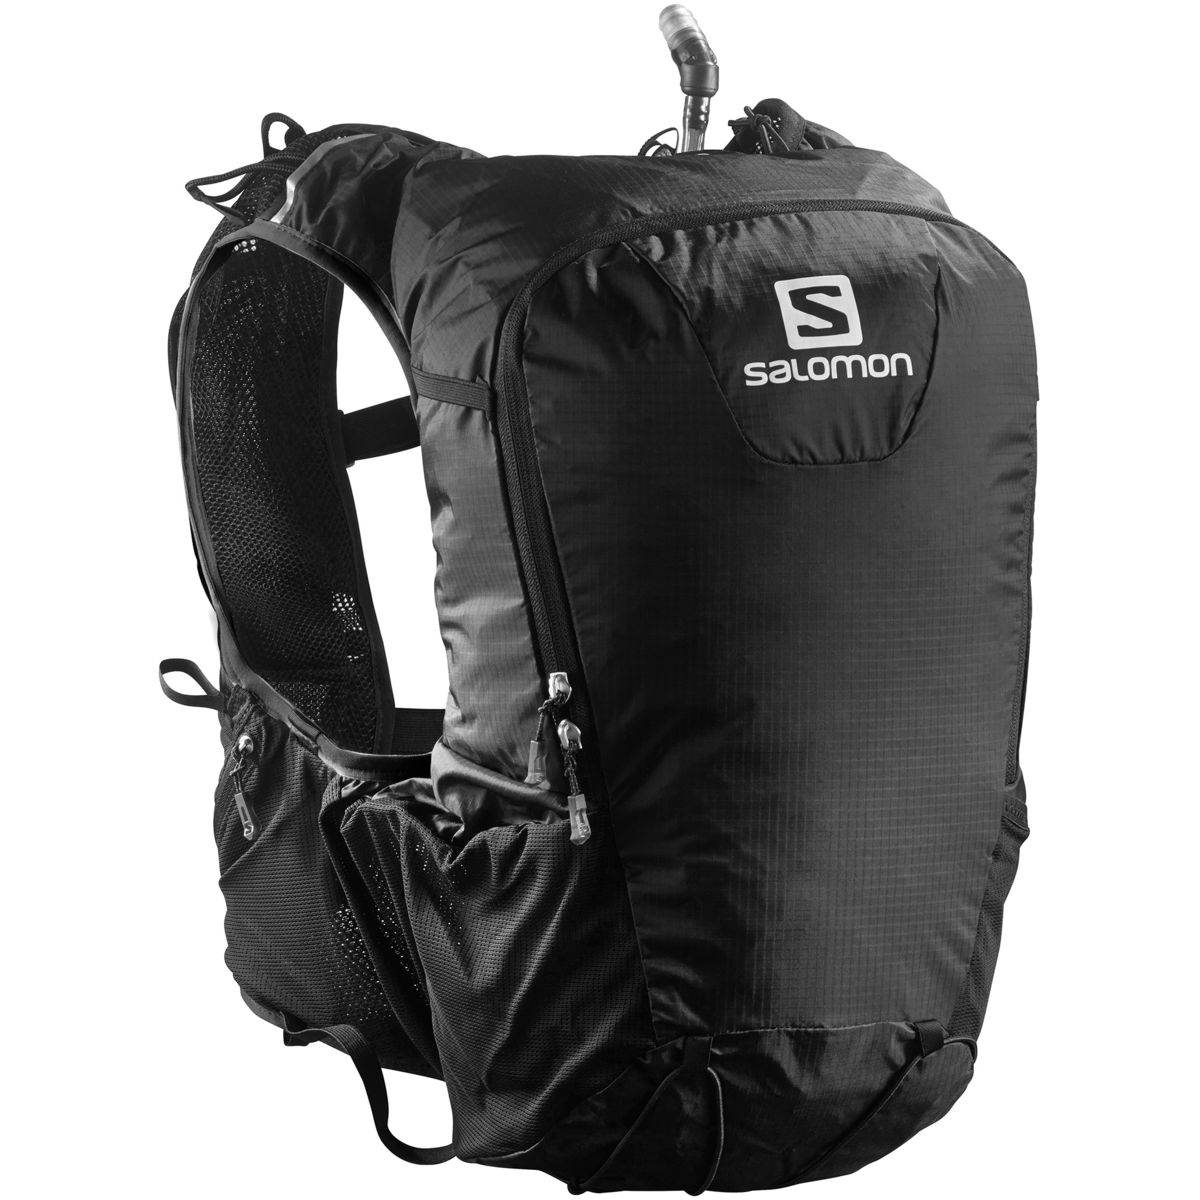 Proportional Snazzy frokost Salomon Skin Pro 15L Backpack - Hike & Camp